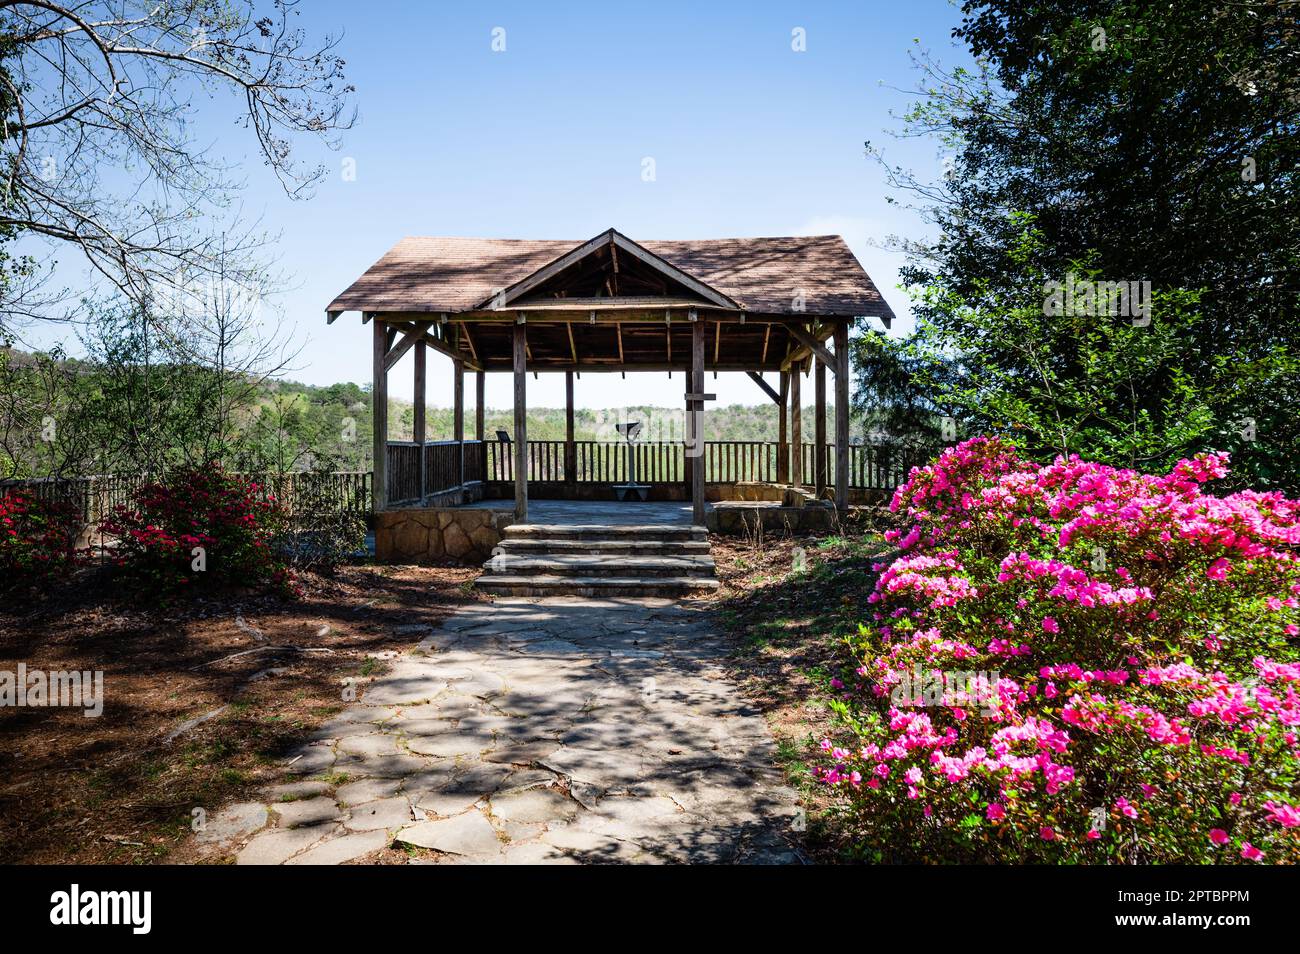 Overlook pavilion surrounded by pink flowers at Tallulah Gorge State Park in Tallulah Falls, Georgia Stock Photo